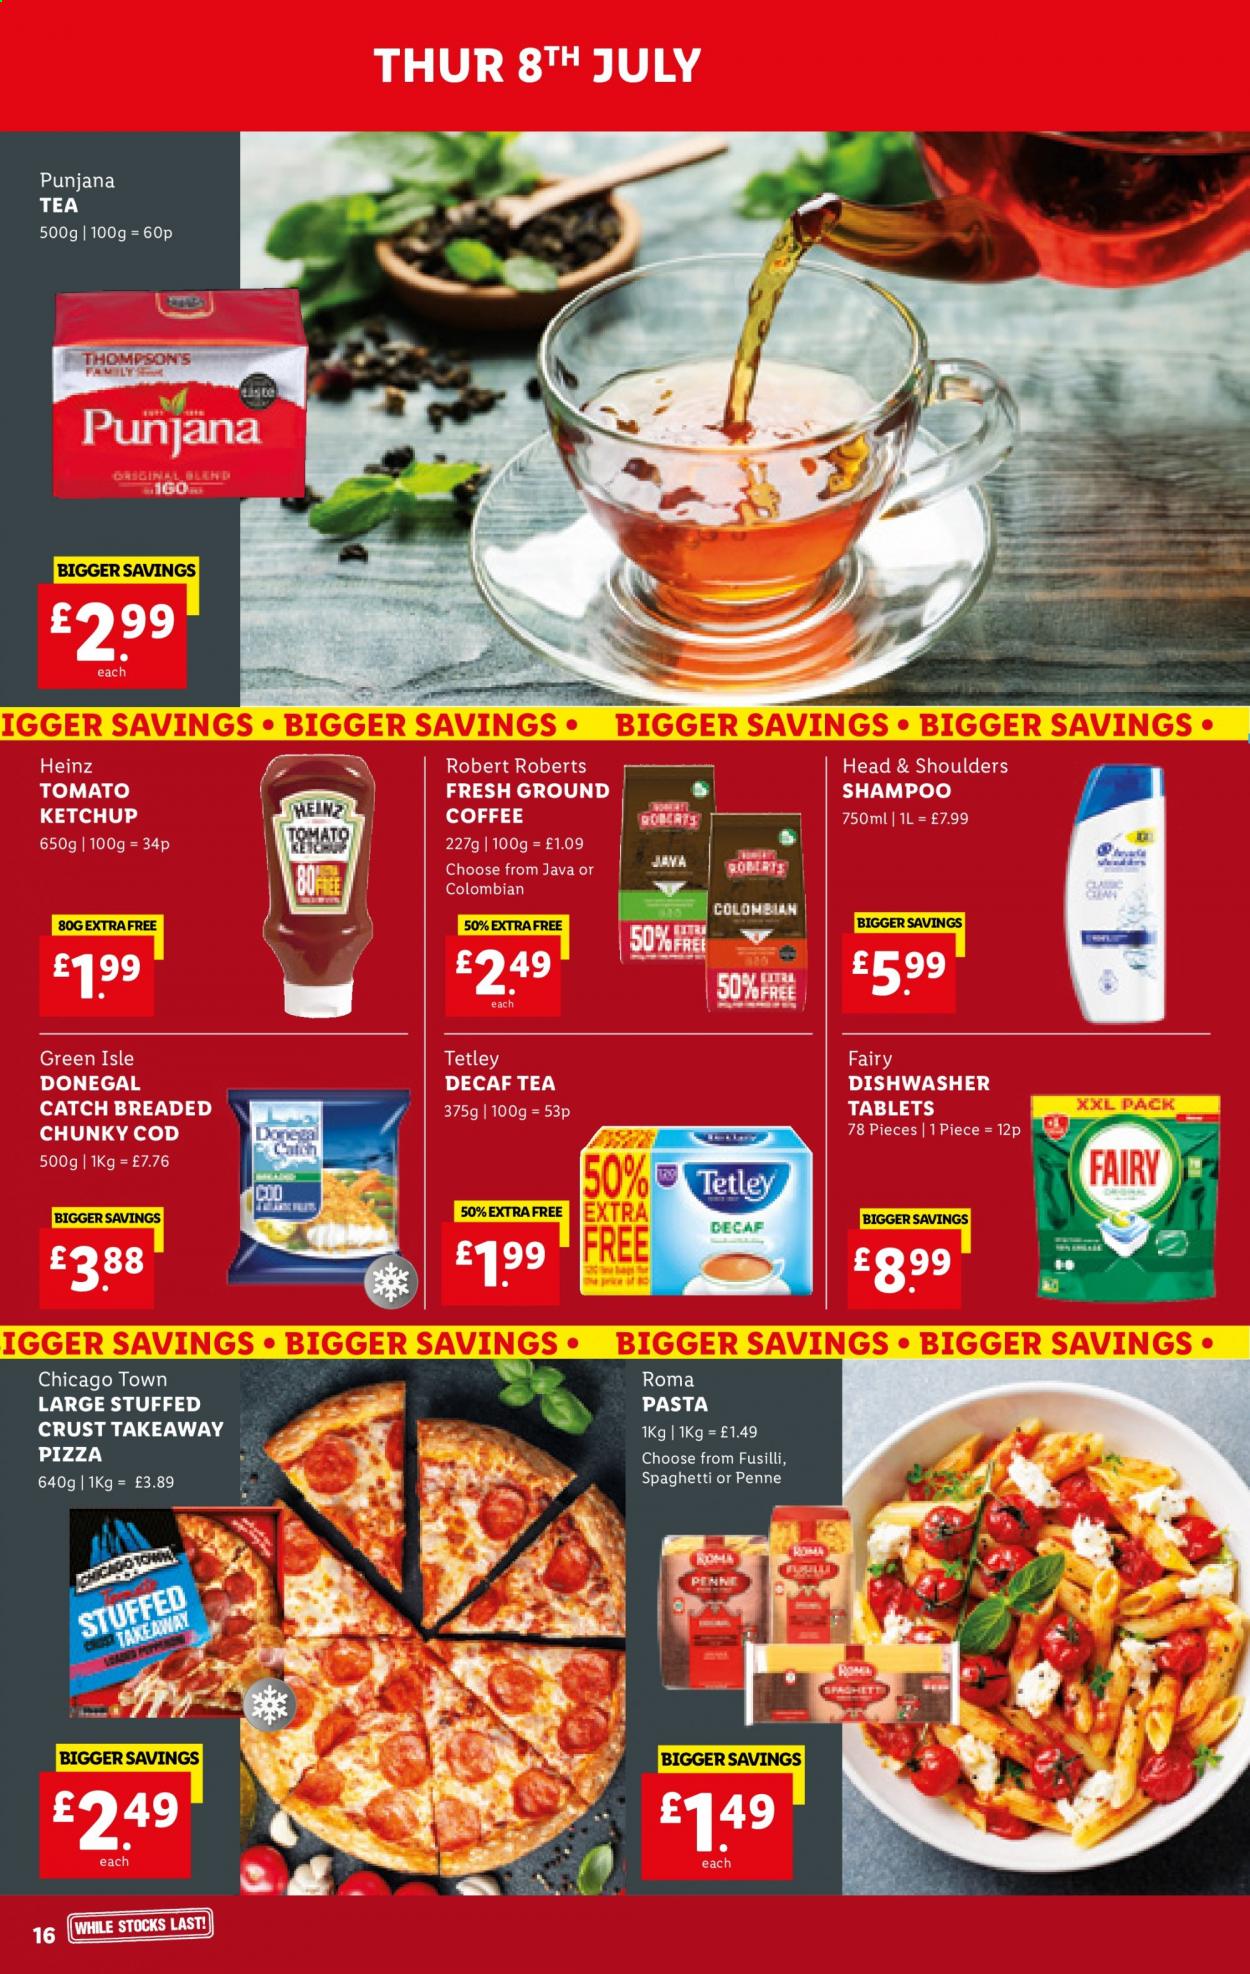 thumbnail - Lidl offer  - 08/07/2021 - 14/07/2021 - Sales products - cod, spaghetti, pizza, pasta, Donegal Catch, Heinz, penne, ketchup, tea, Punjana, coffee, Fairy, shampoo, Head & Shoulders, Thompson's. Page 16.